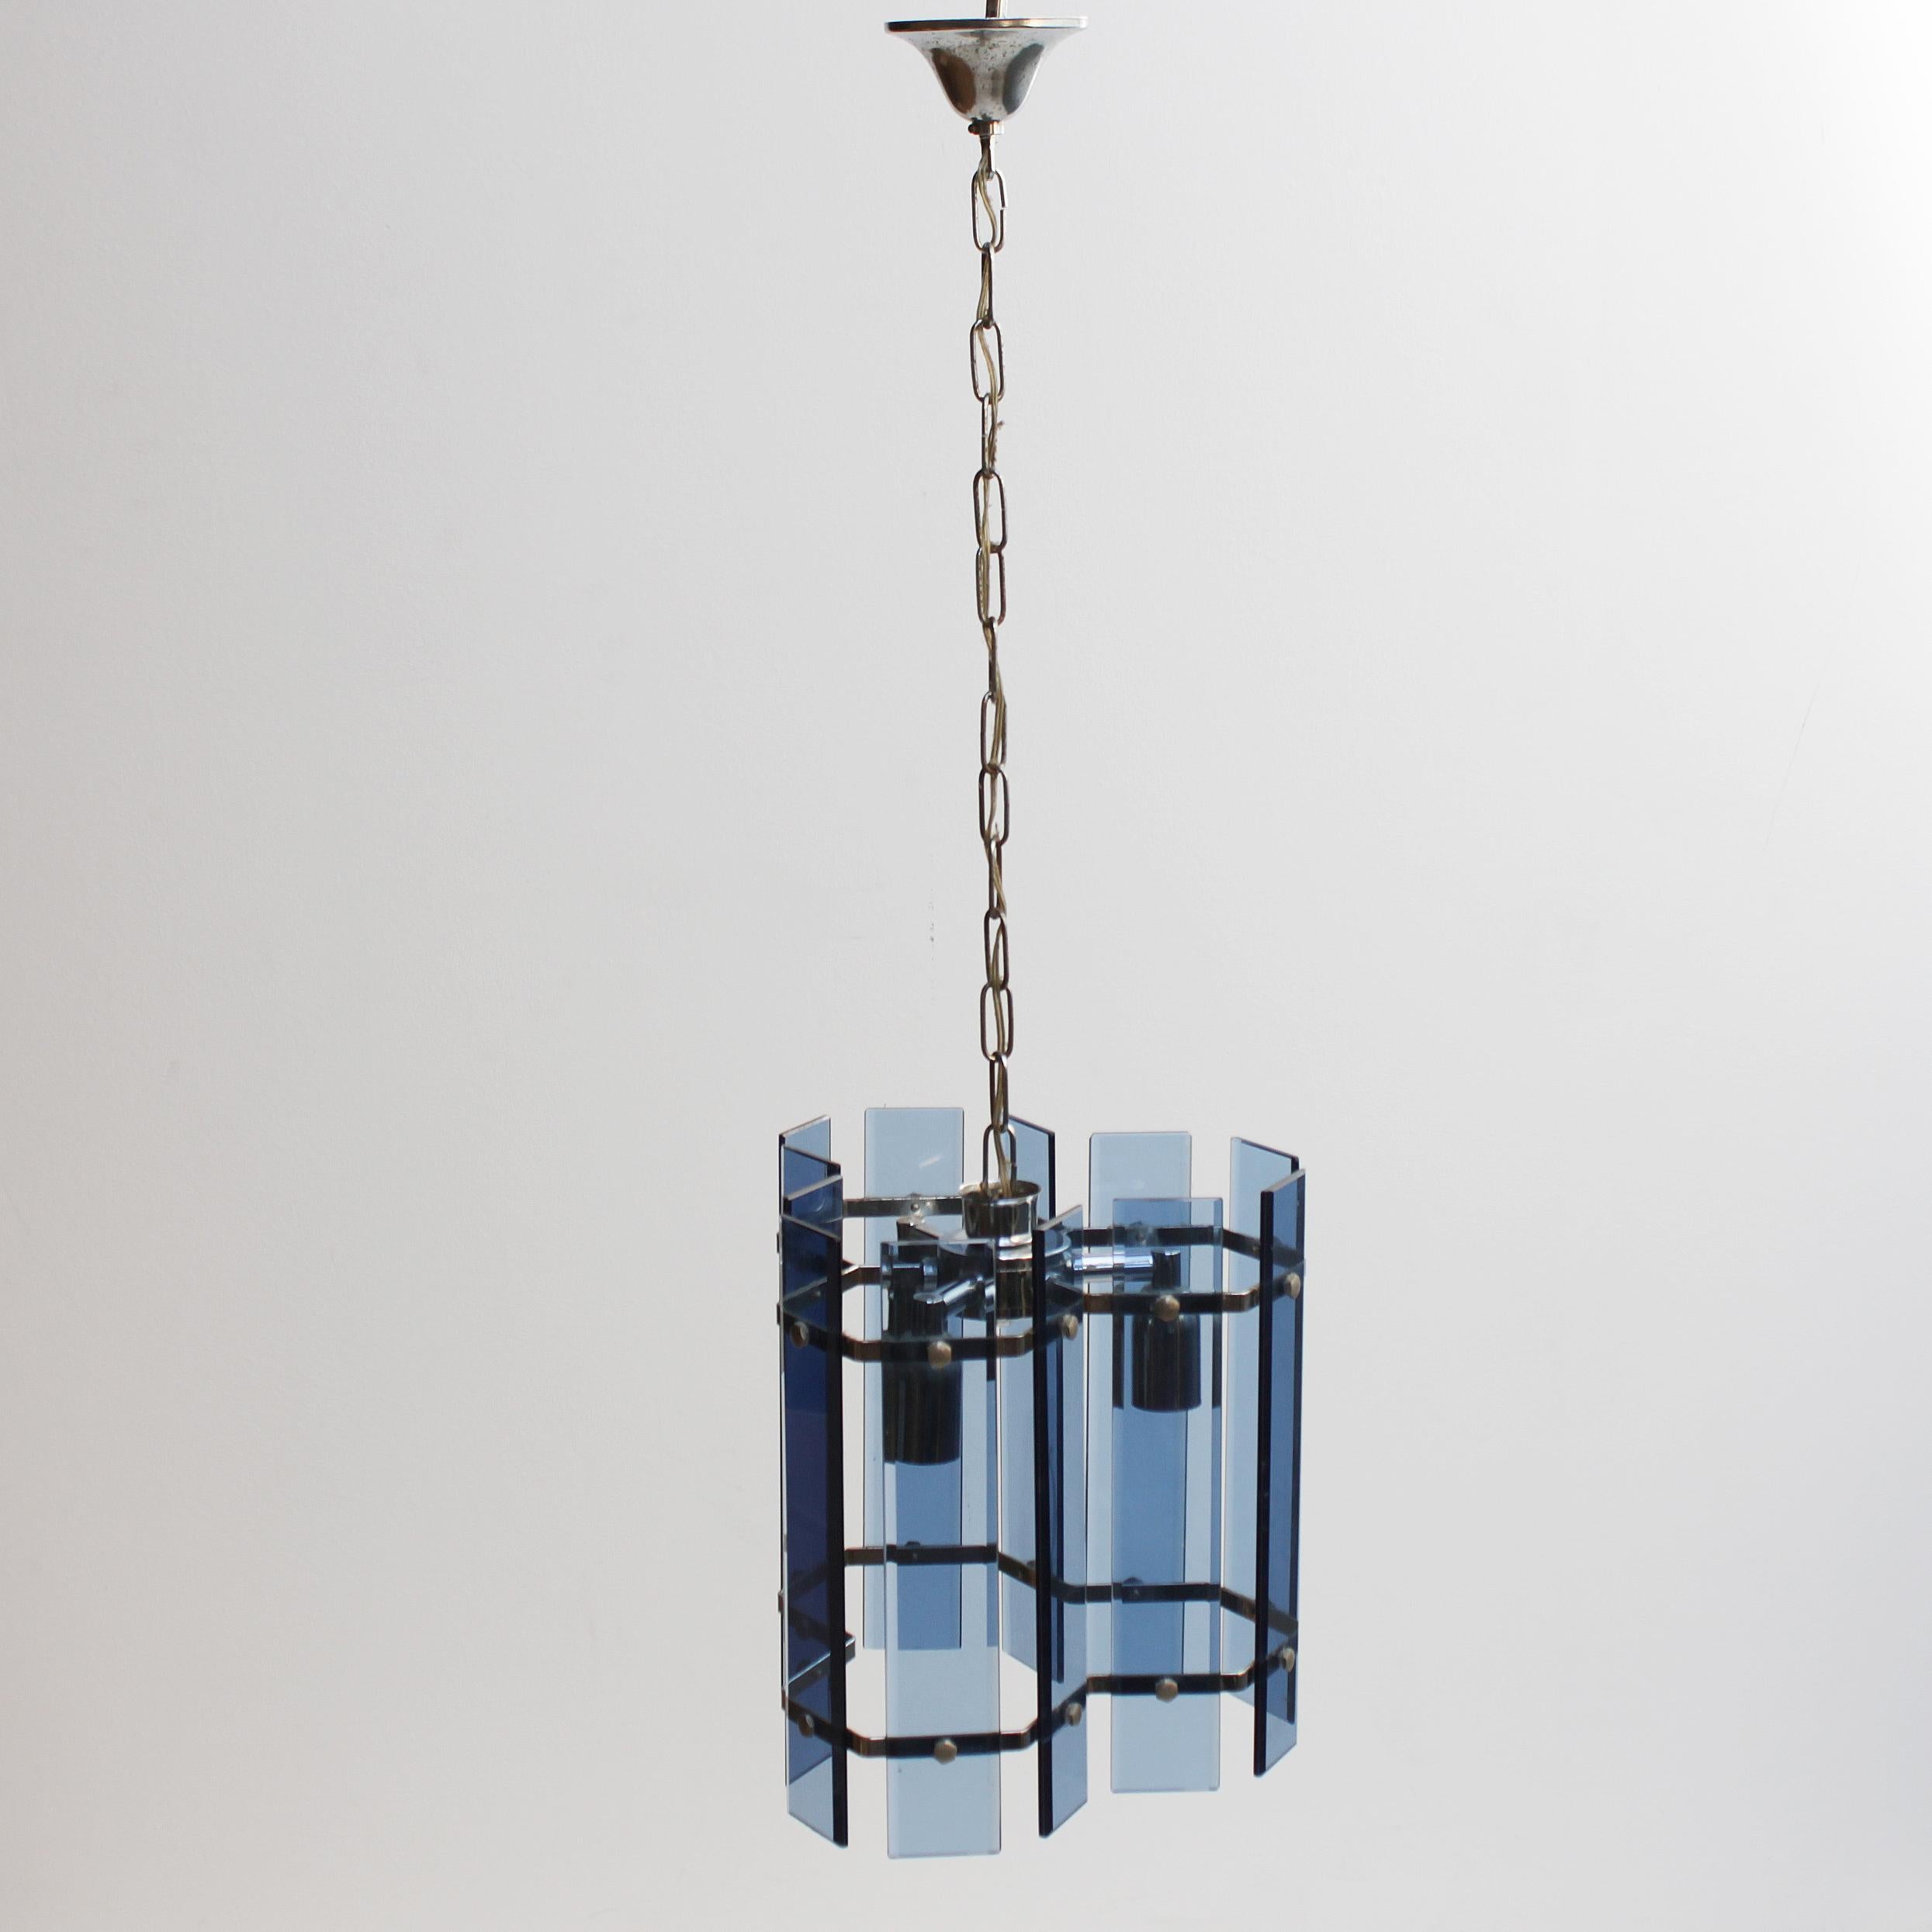 Mid-20th Century Glass Chandelier in the Manner of Fontana Arte For Sale